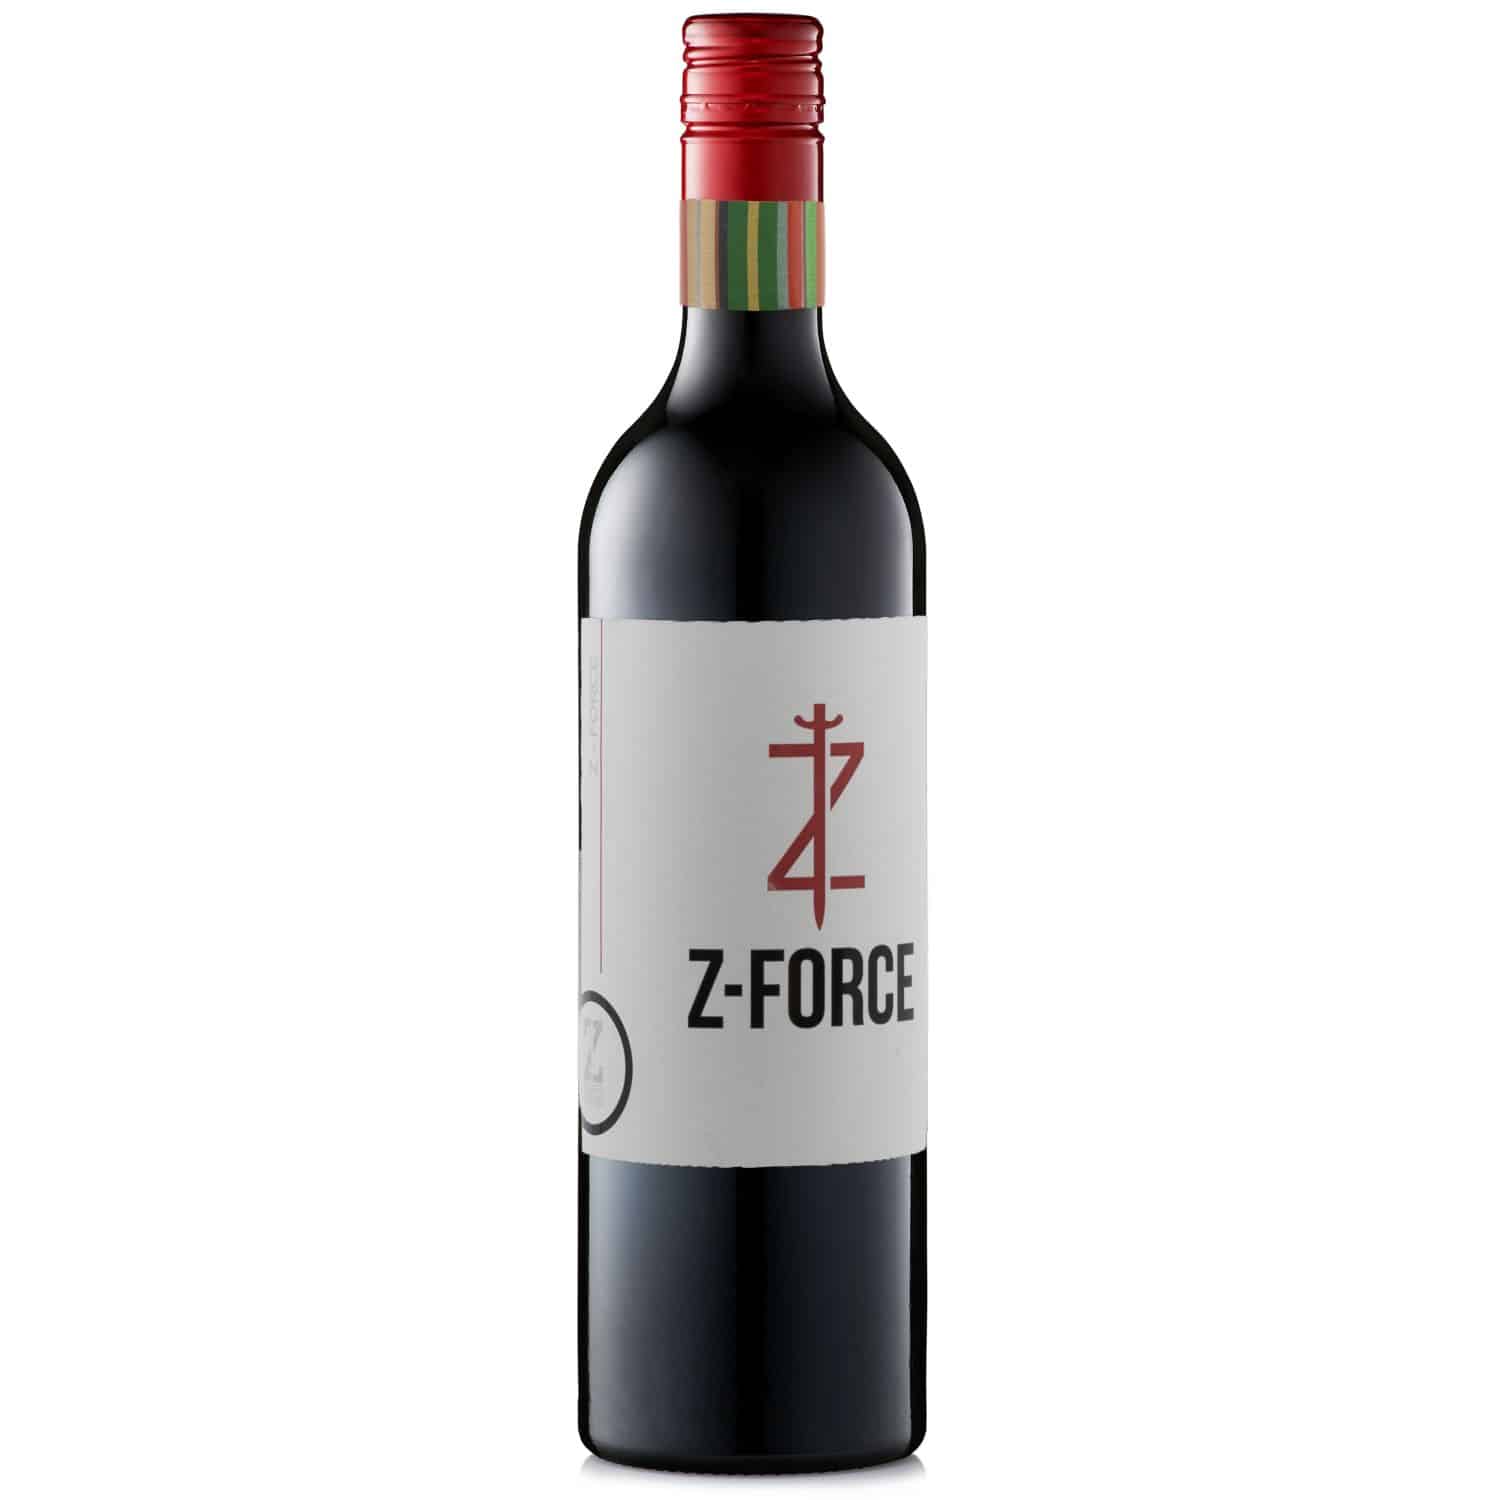 Zonte’s Footstep Z-Force Shiraz 2020